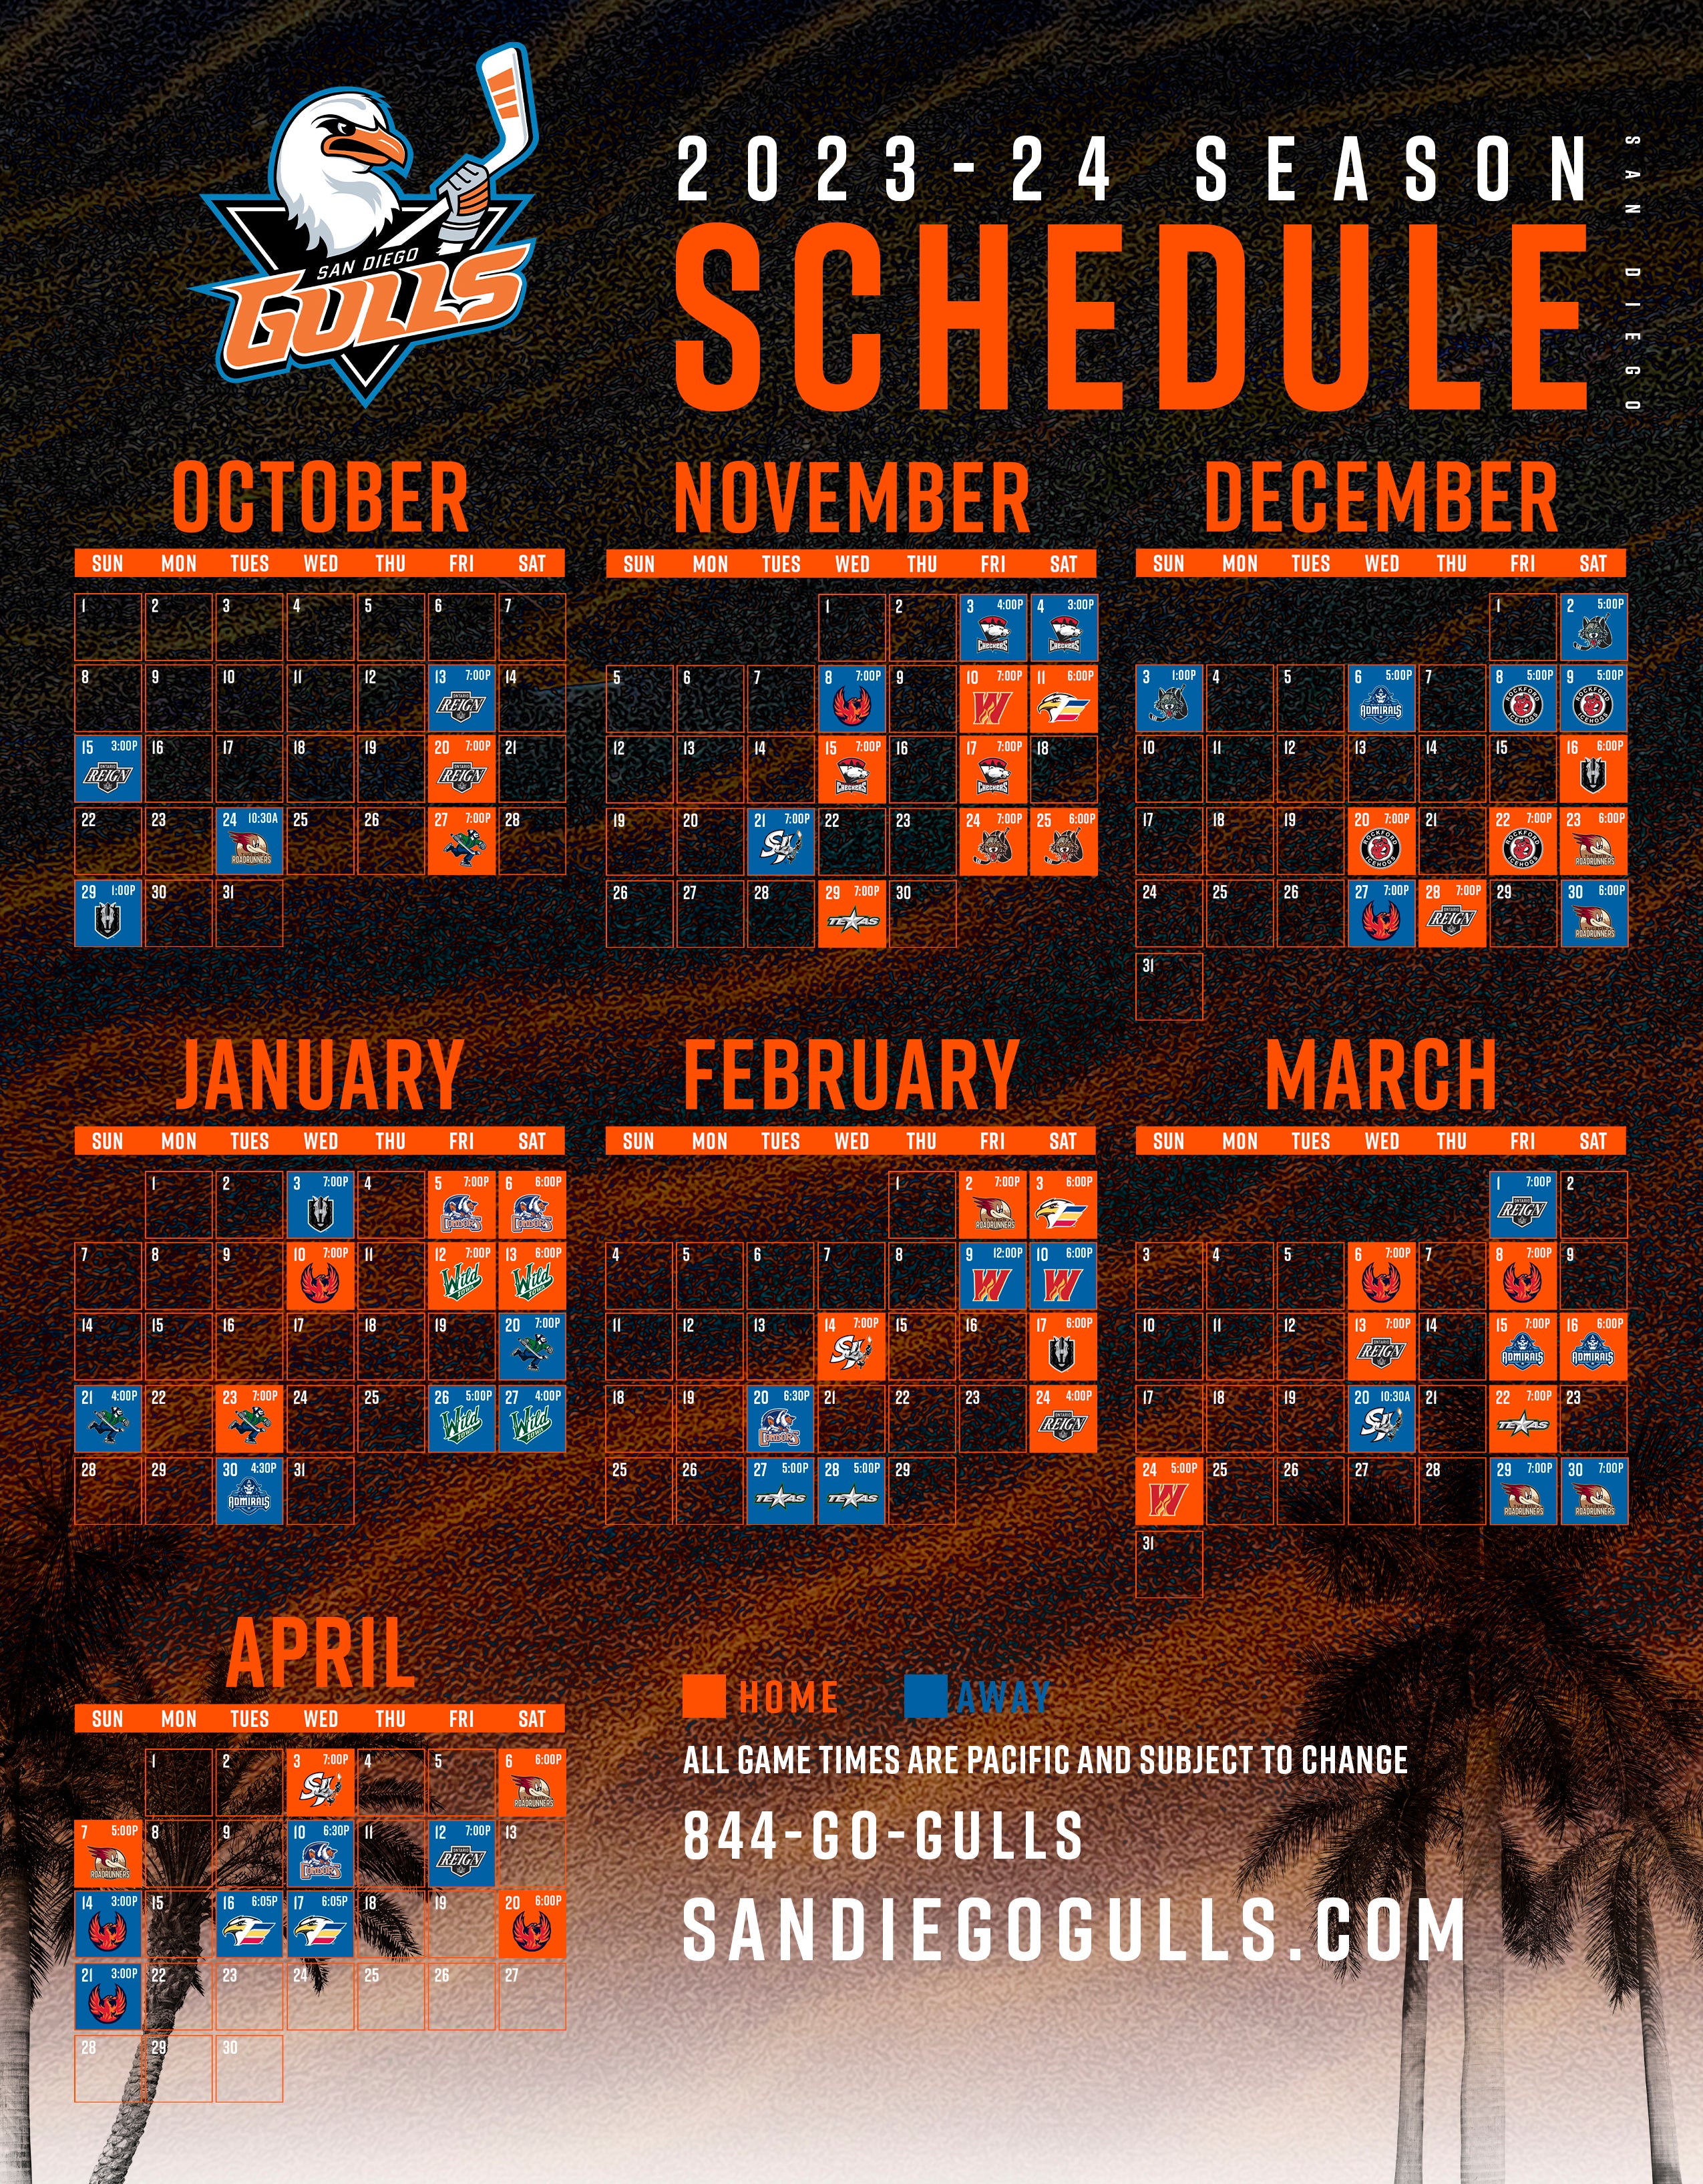 Gulls set date, time for 2023-24 home opener - The San Diego Union